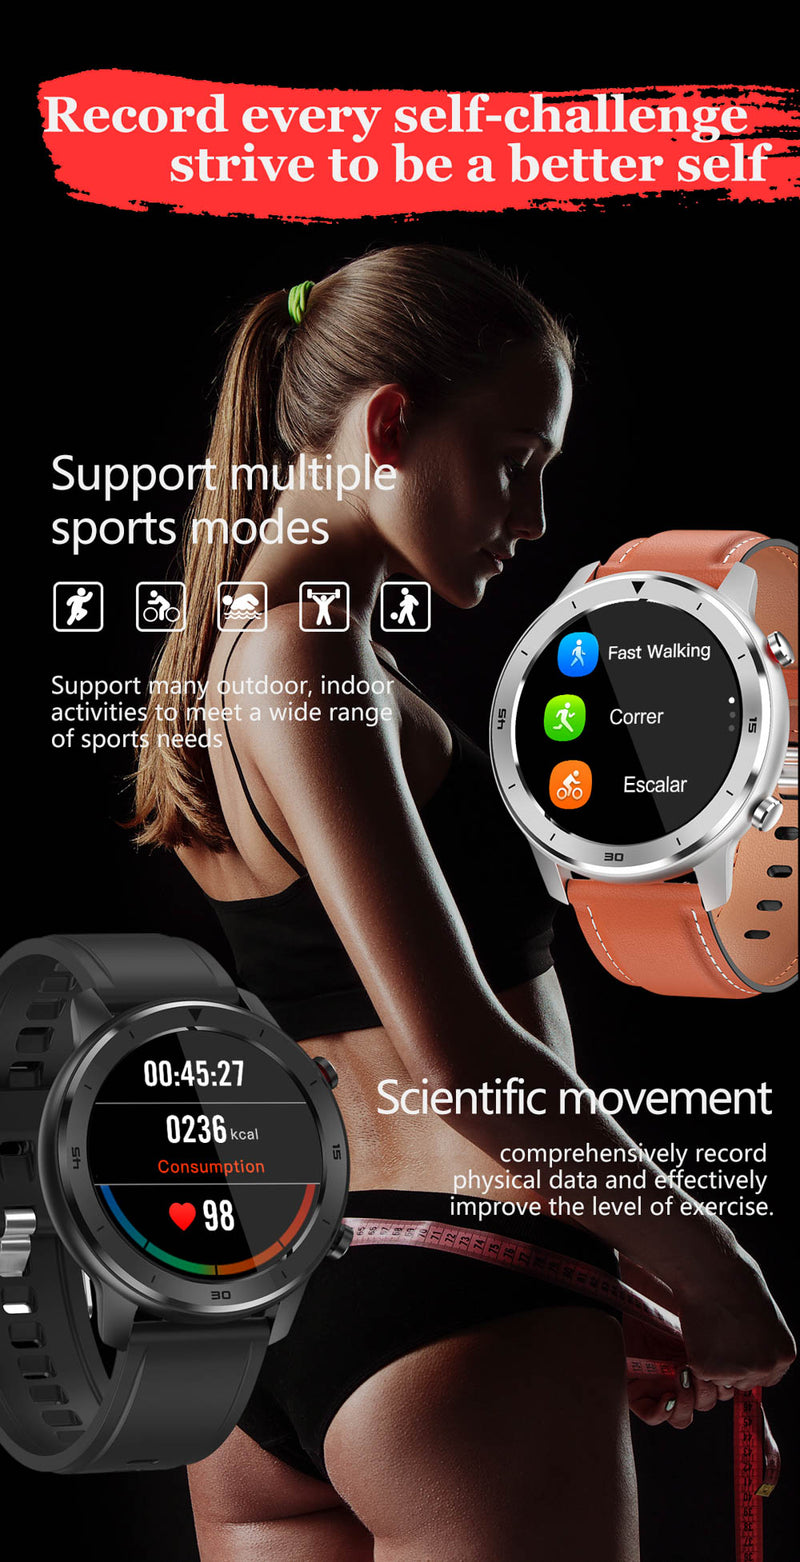 Fitness Smartwatch "Boid" - Für Android & iOS - GYMAHOLICS